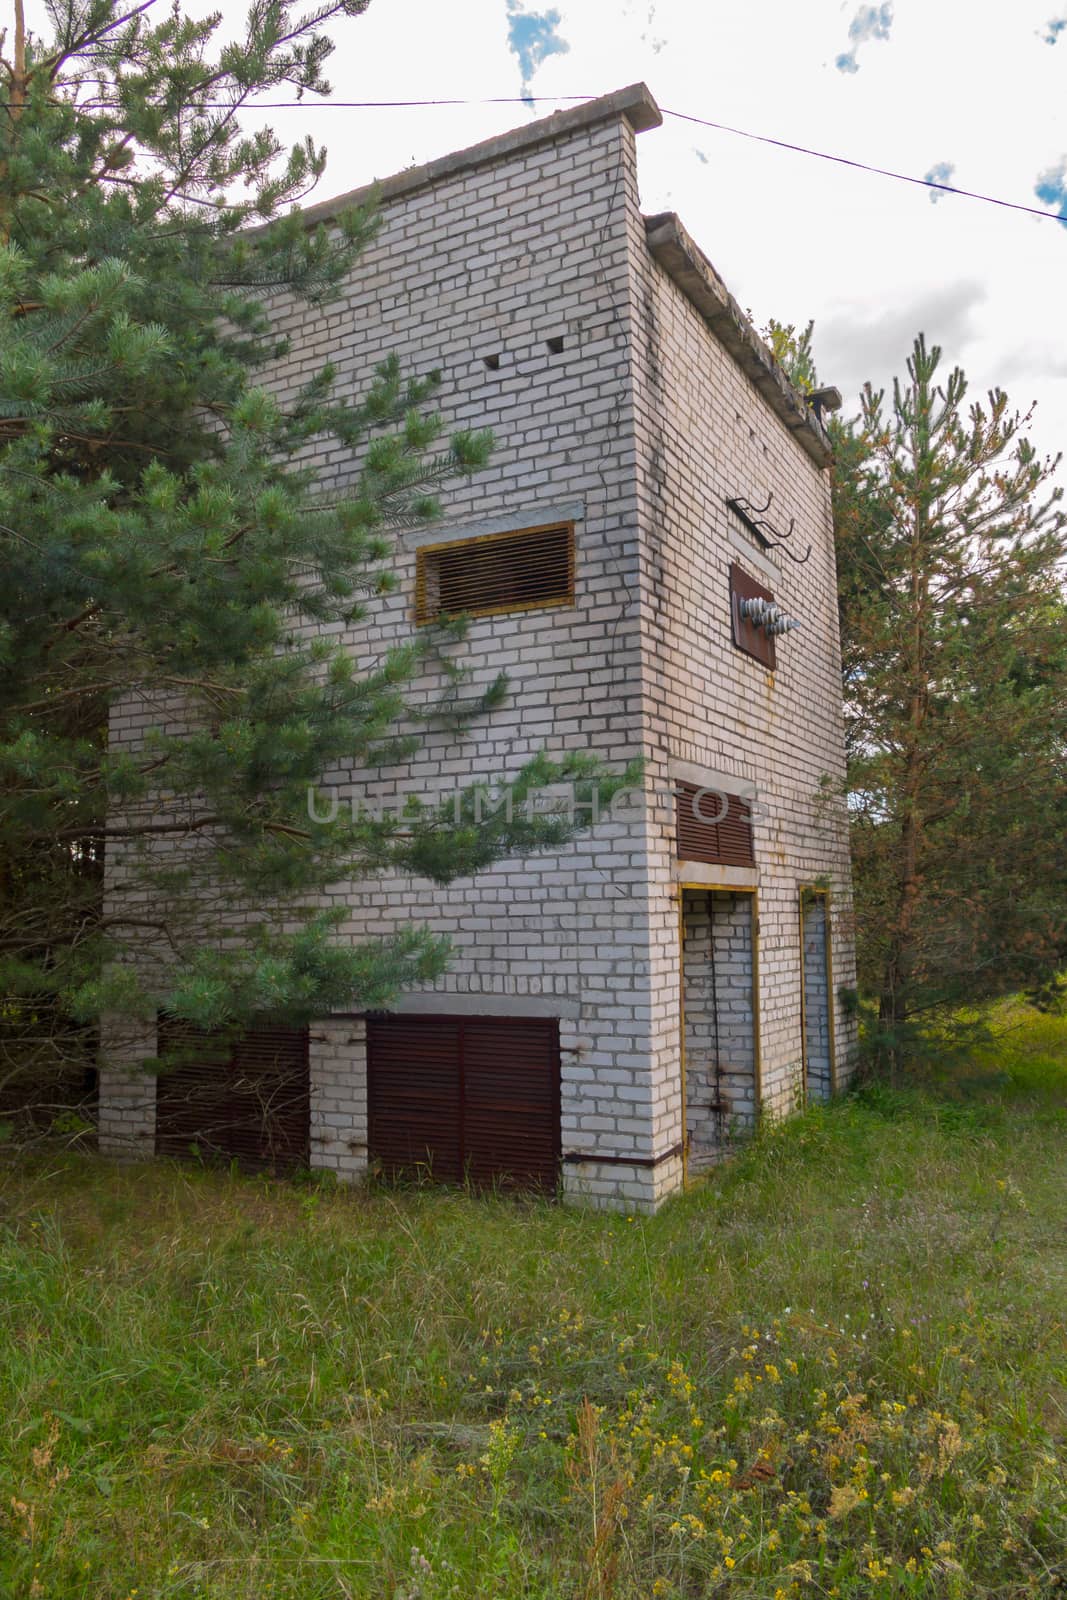 The old abandoned building is surrounded by tall green trees on the background of a blue sky by Adamchuk